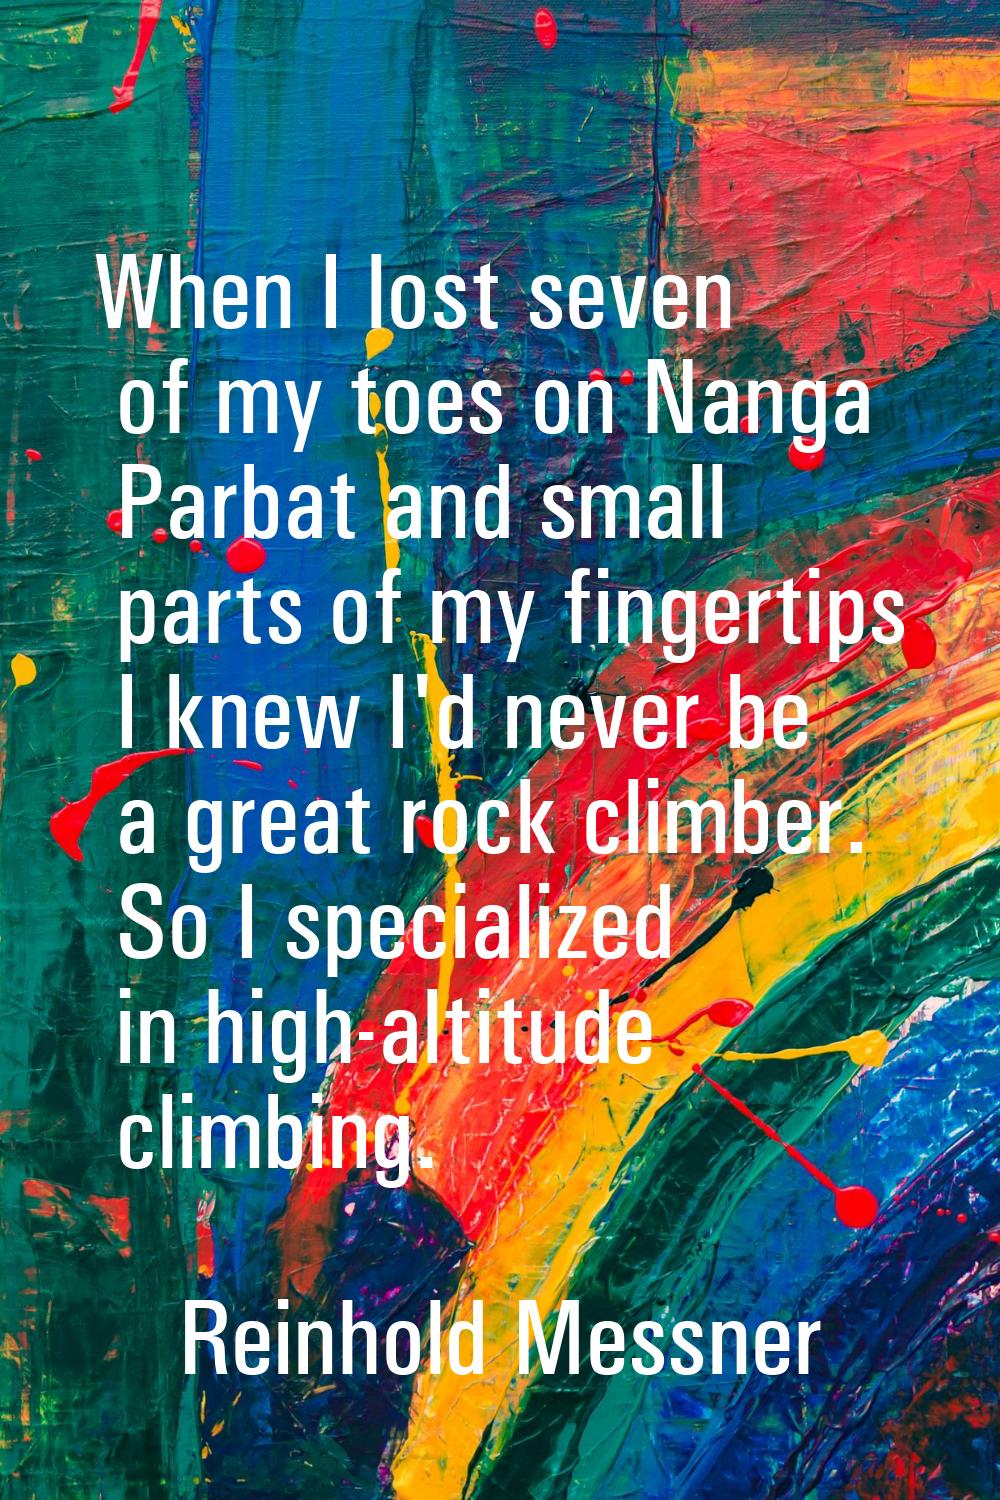 When I lost seven of my toes on Nanga Parbat and small parts of my fingertips I knew I'd never be a